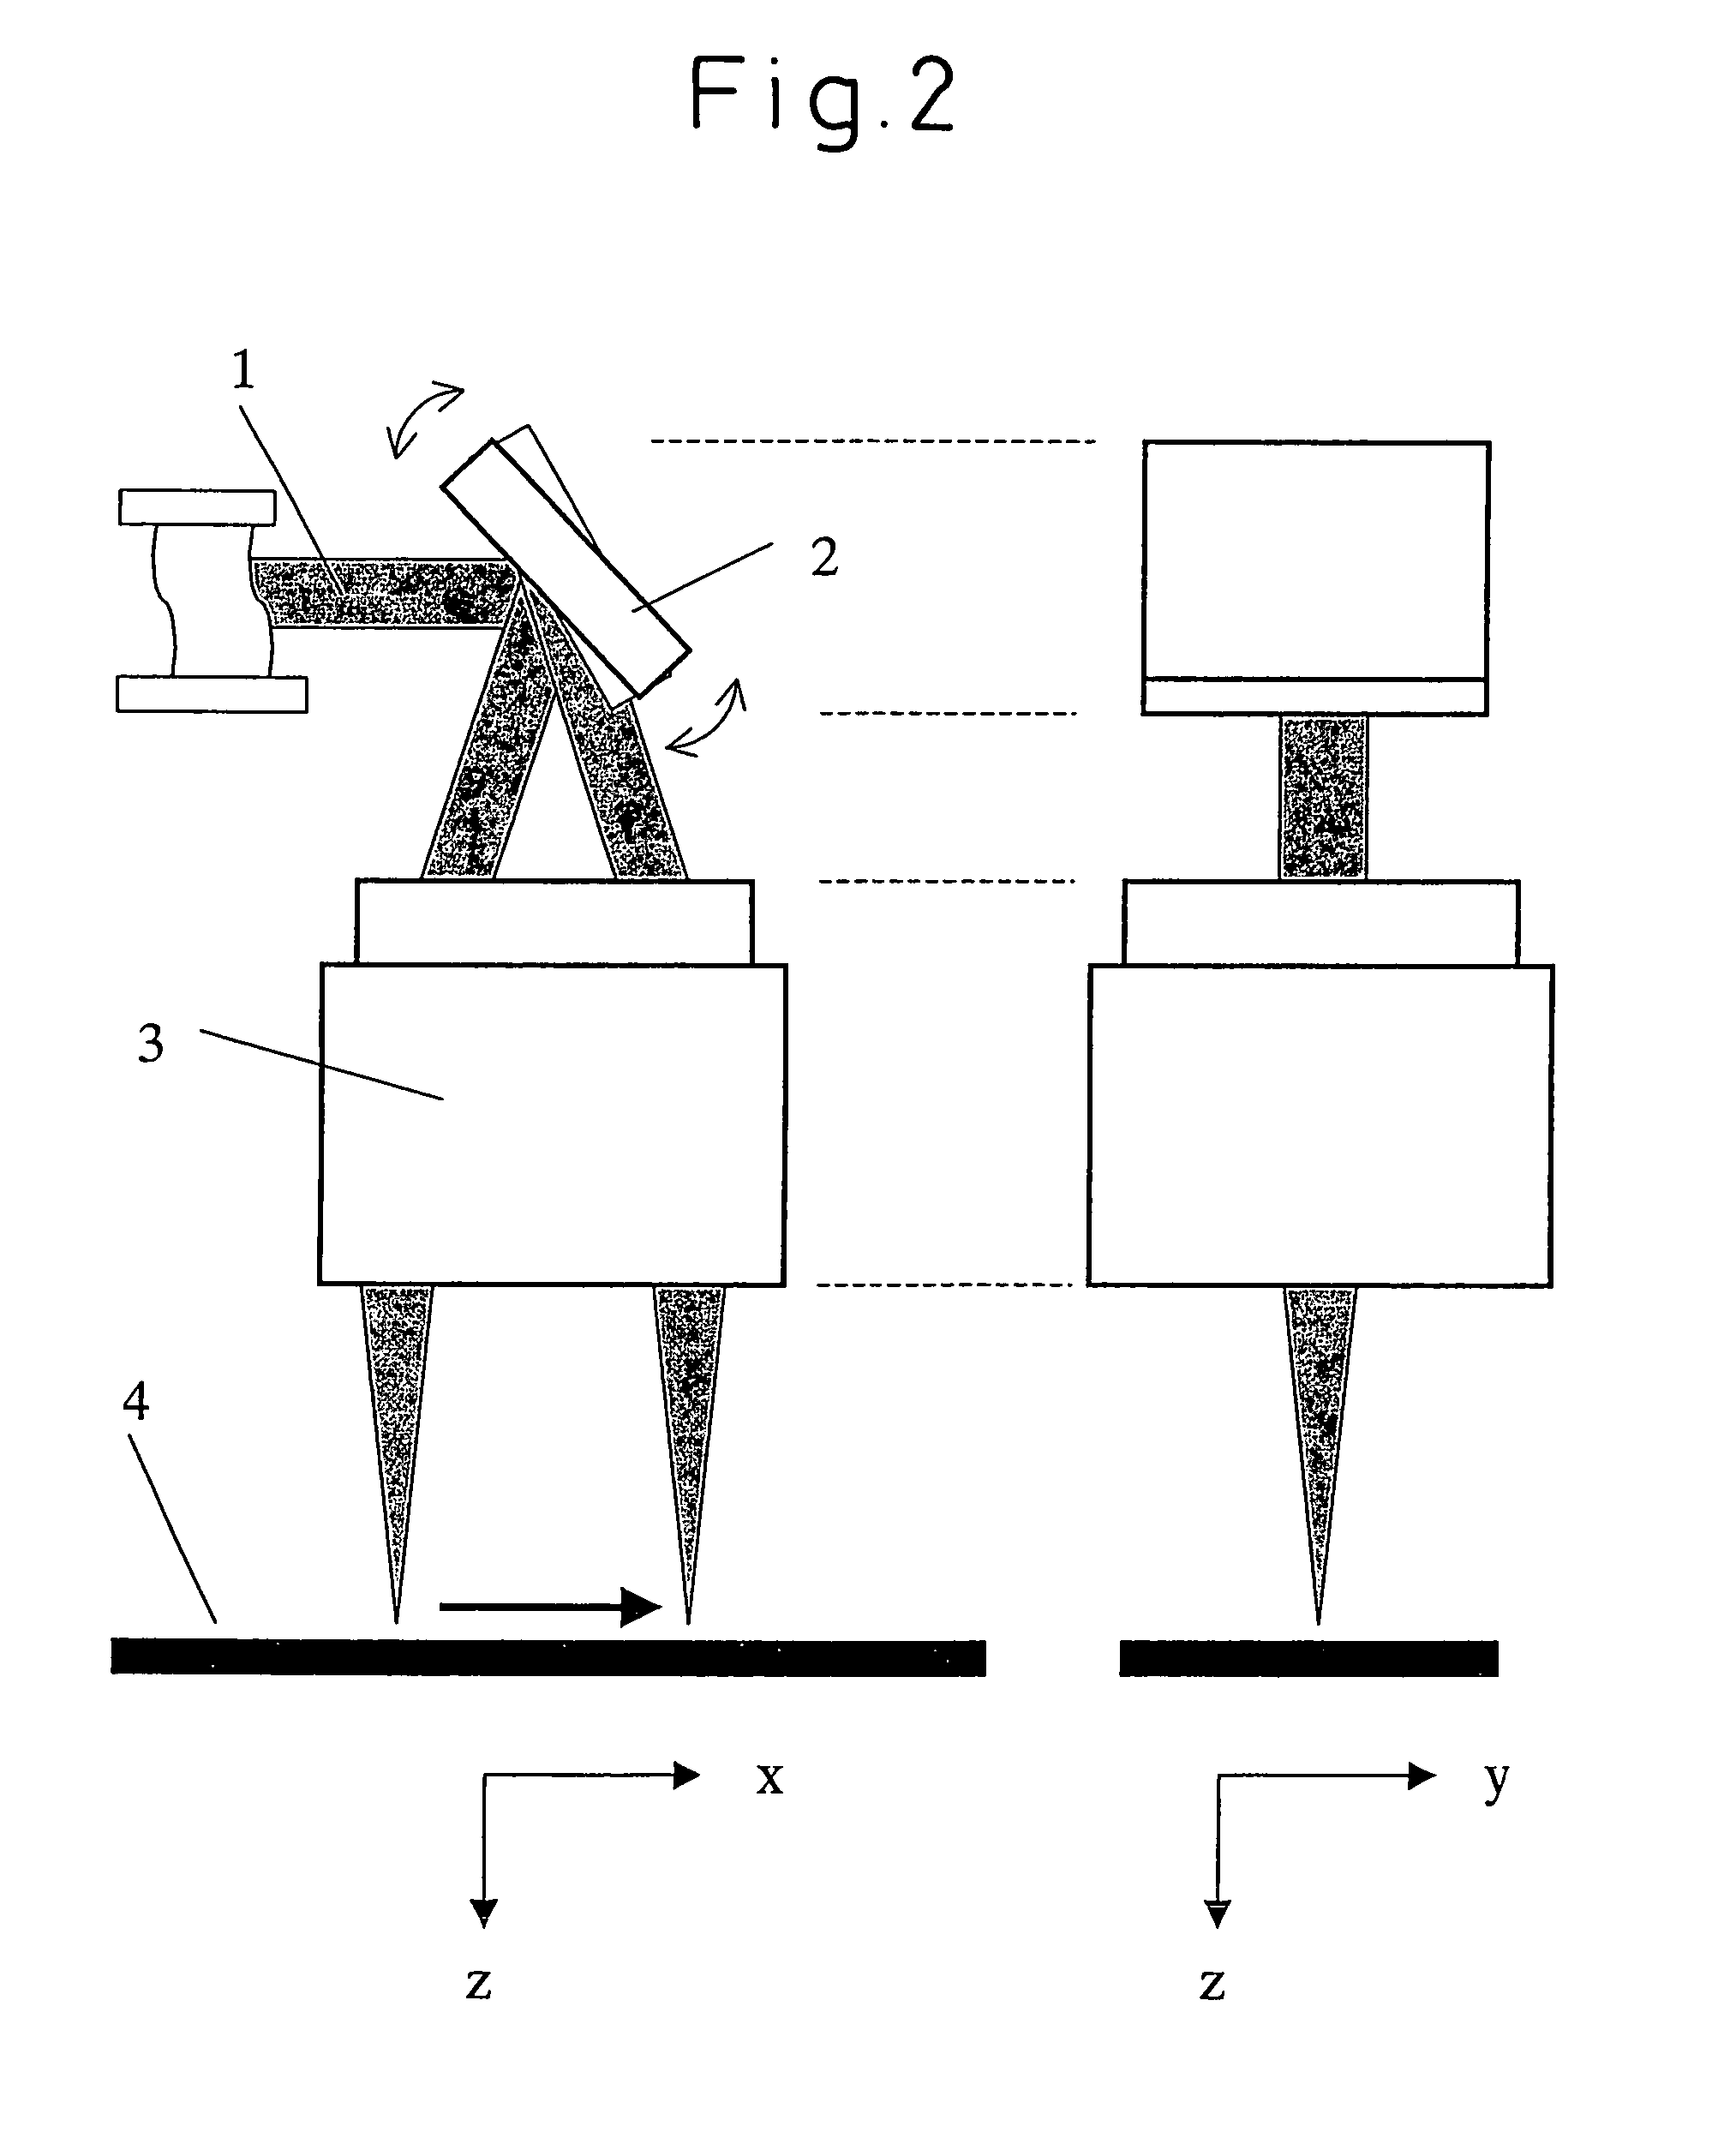 Grain-oriented electrical steel sheet superior in electrical characteristics and method of production of same